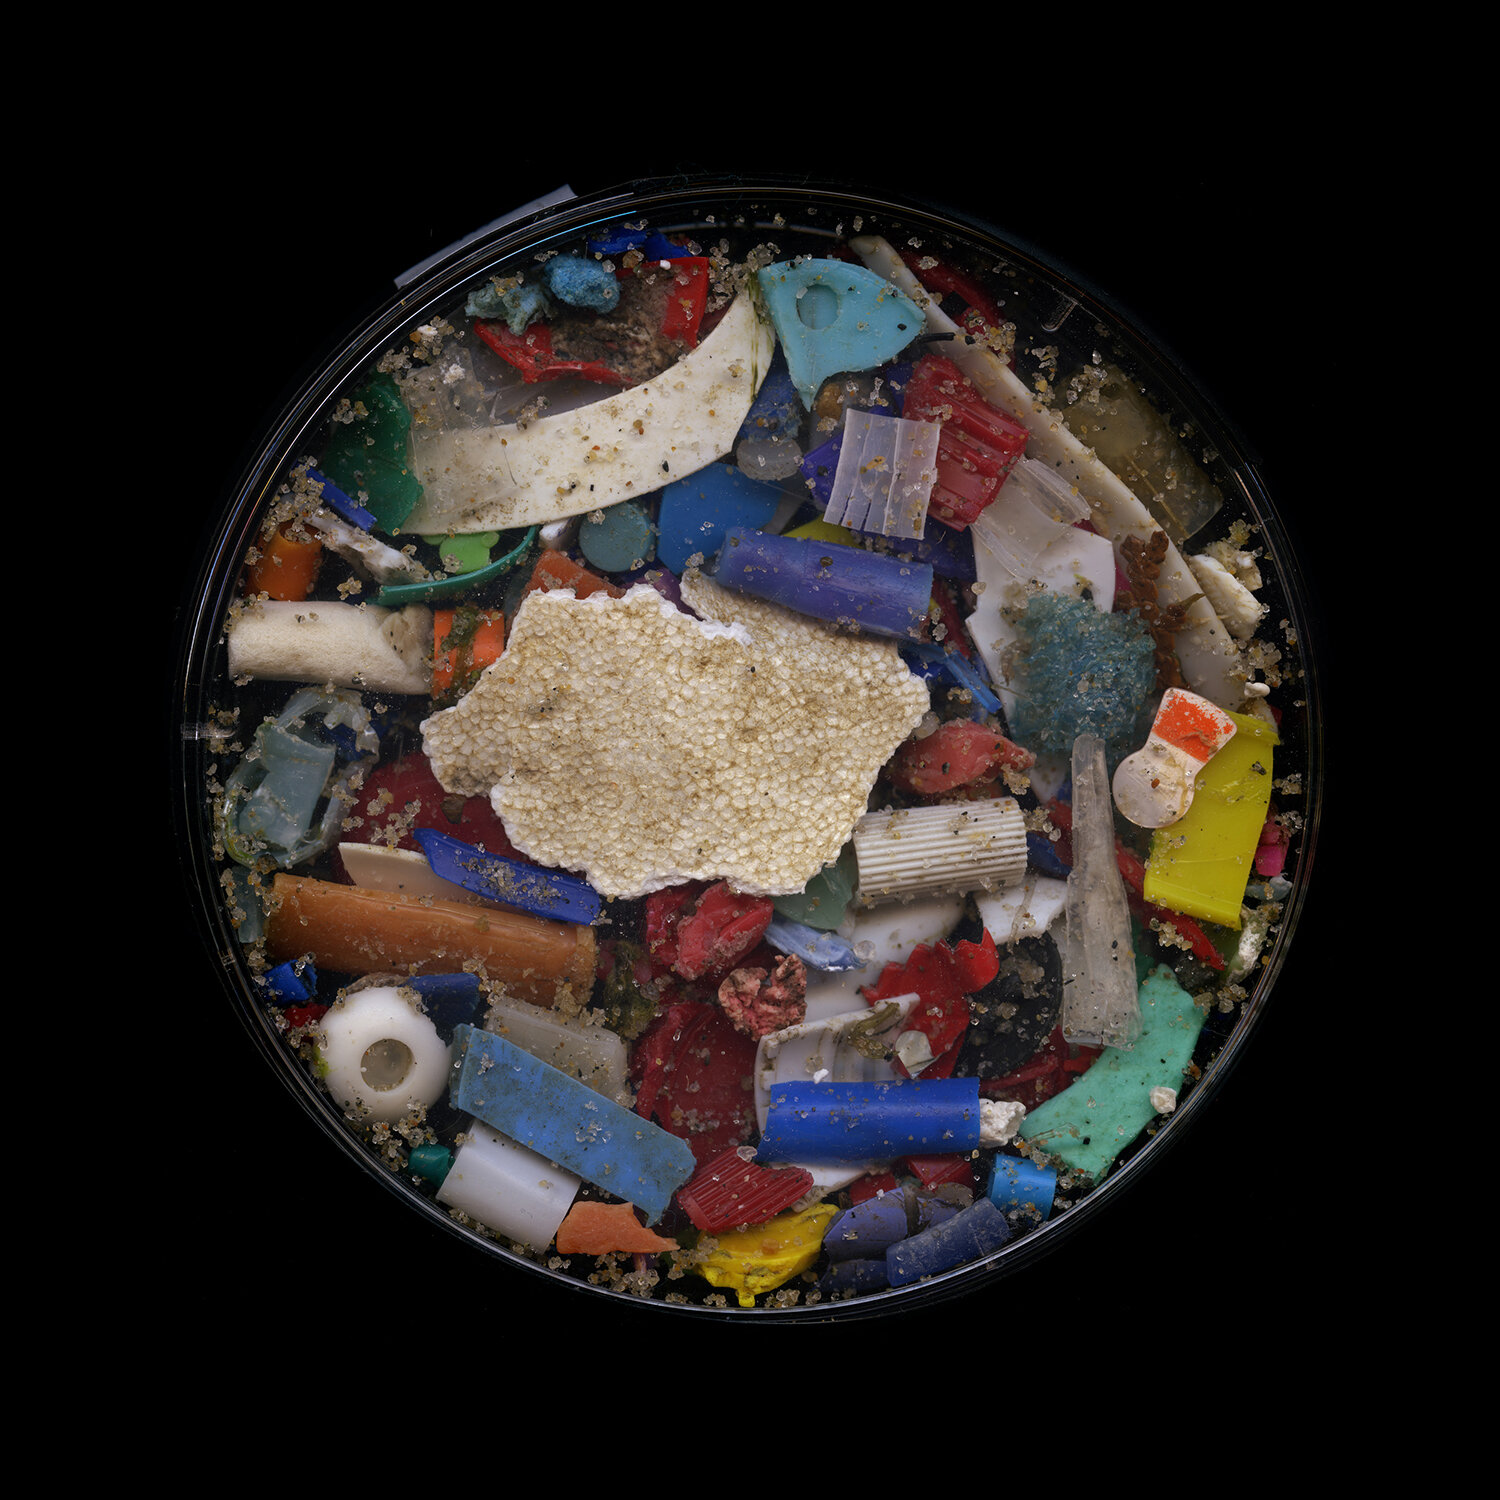  Elizabeth Ellenwood   Collection #25 , 2019  Location: Napatree Point, Wach Hil, RI   From the series: Sand and Plastic Collection  Digital Inkjet Print  